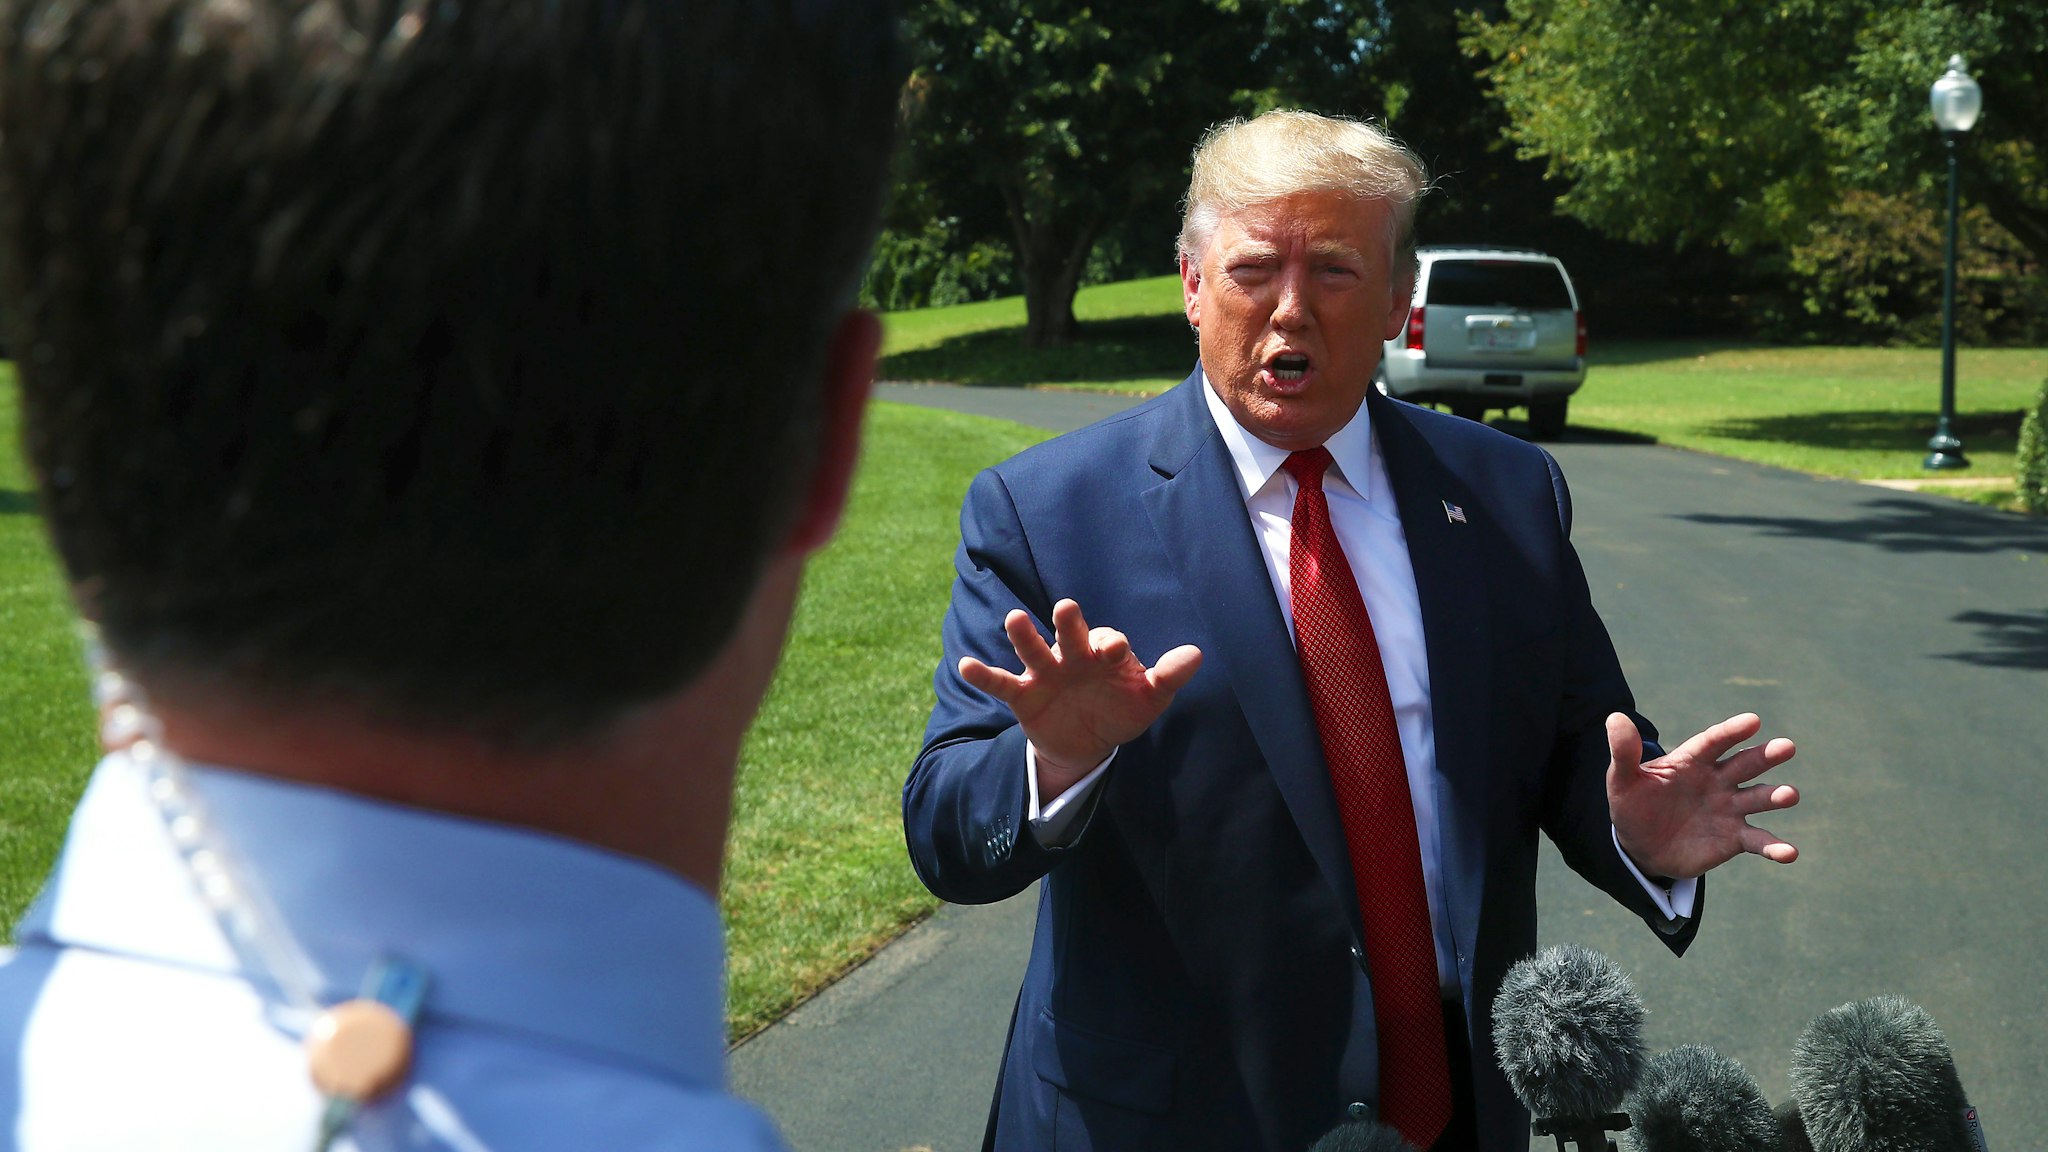 WASHINGTON, DC - AUGUST 21: U.S. President Donald Trump speaks to the media before departing from the White House on August 21, 2019 in Washington, DC. President Trump spoke on several topics including the U.S. economy and why he canceled his trip to Denmark. (